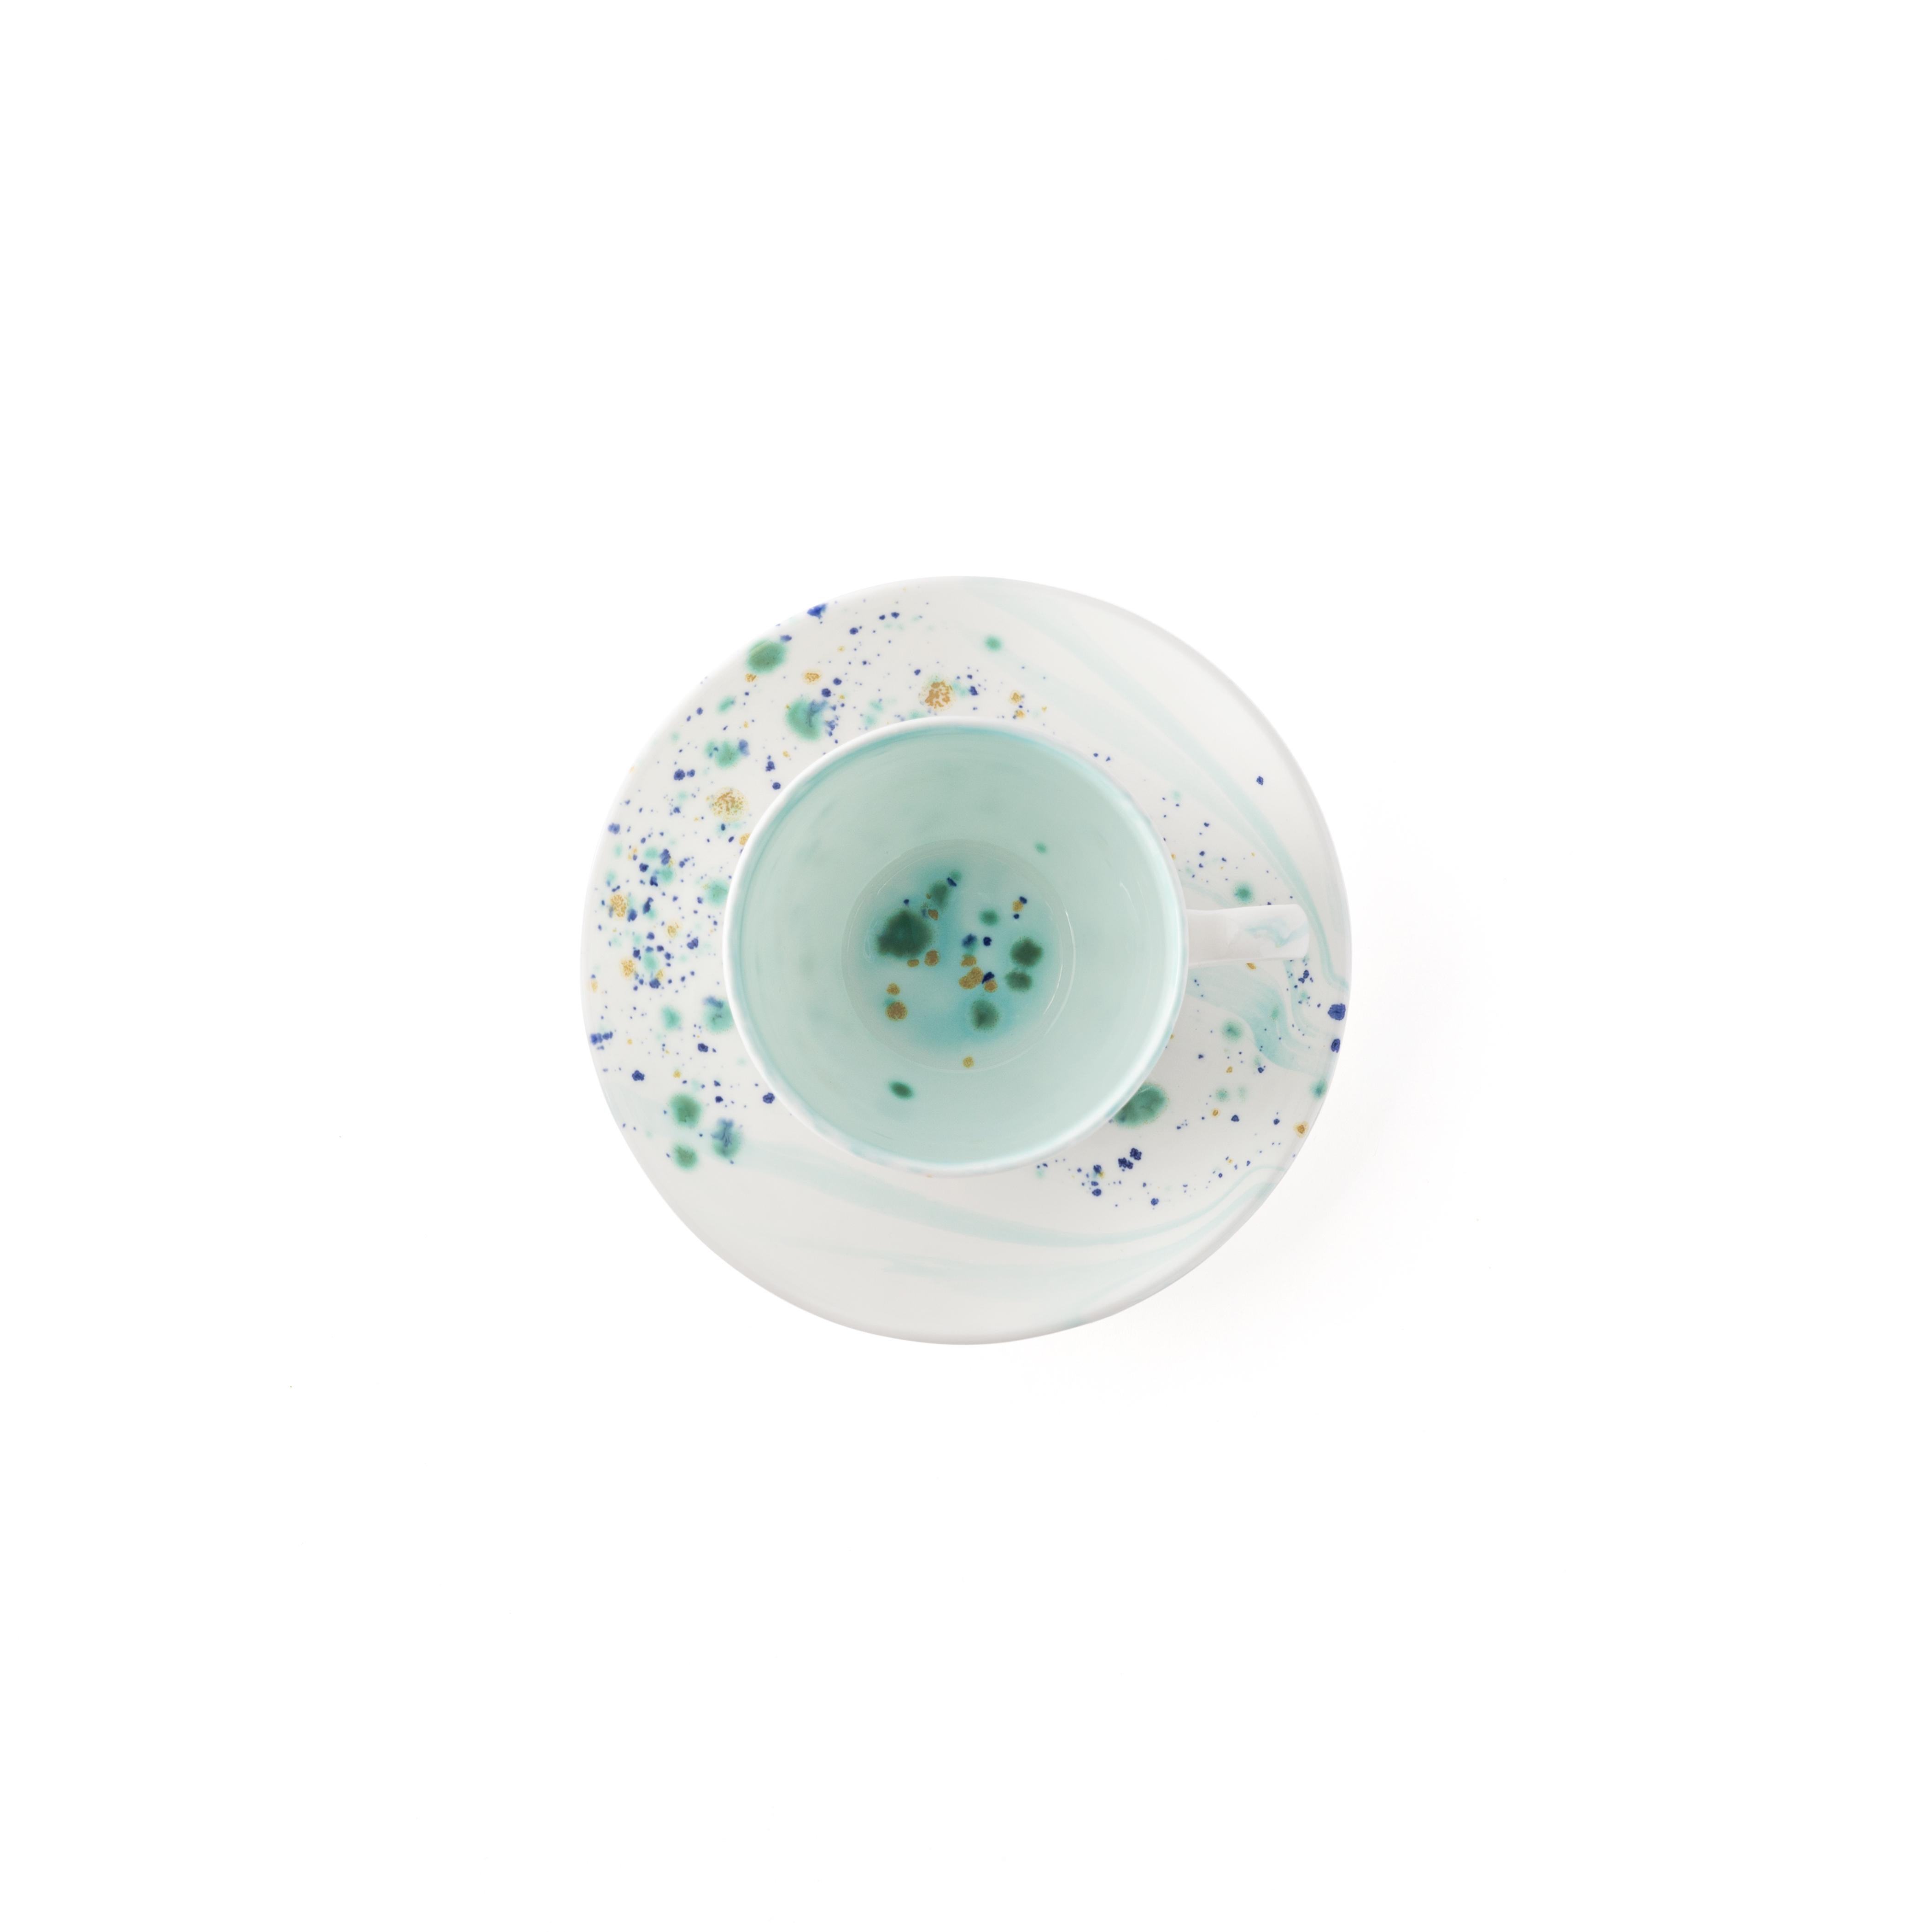 Handcrafted in Italy from the finest porcelain, these coffee cups and saucers from the Blue Marble Collection have a warm, berry-like enamel decoration painted in dots, drips and strokes that give it a fresh and dynamic appearance.

Set of 2